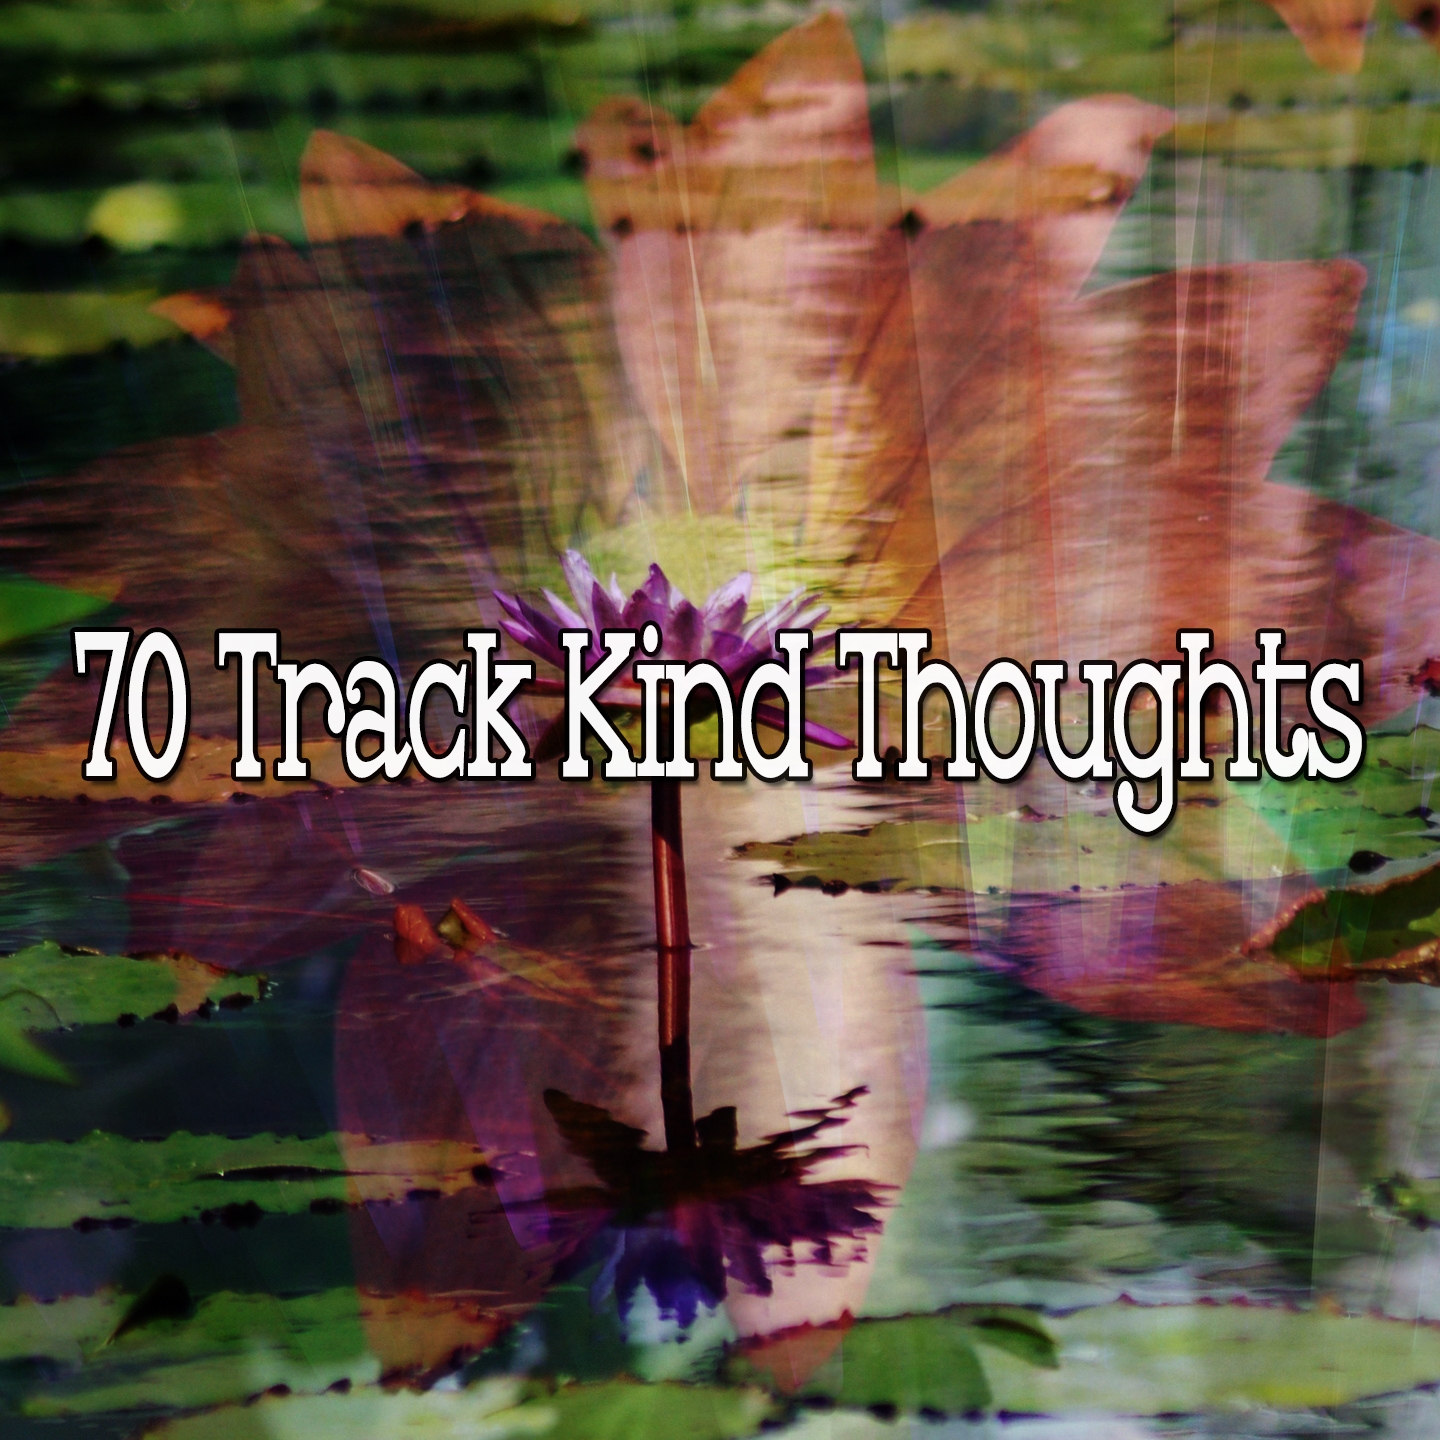 70 Track Kind Thoughts